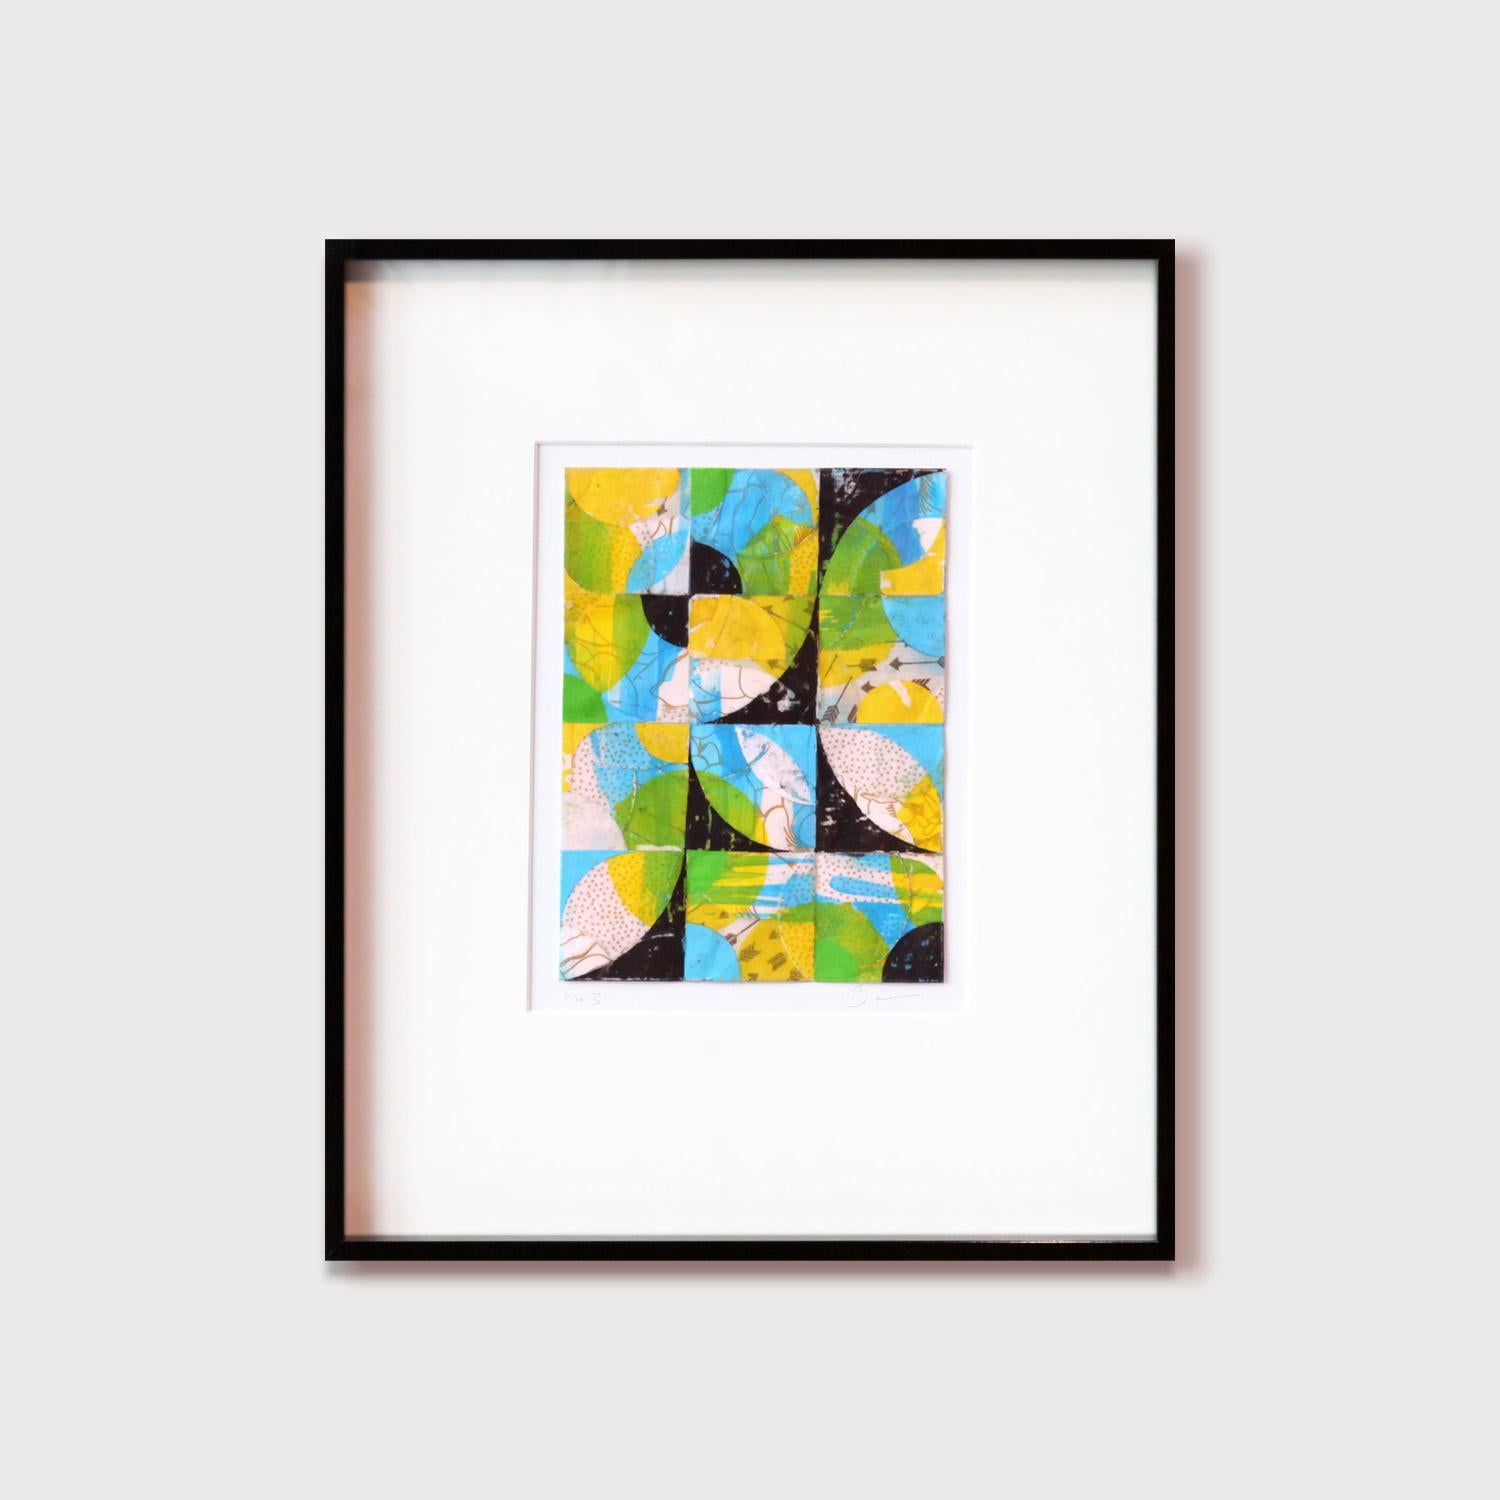 Geometric Abstract Painting, 